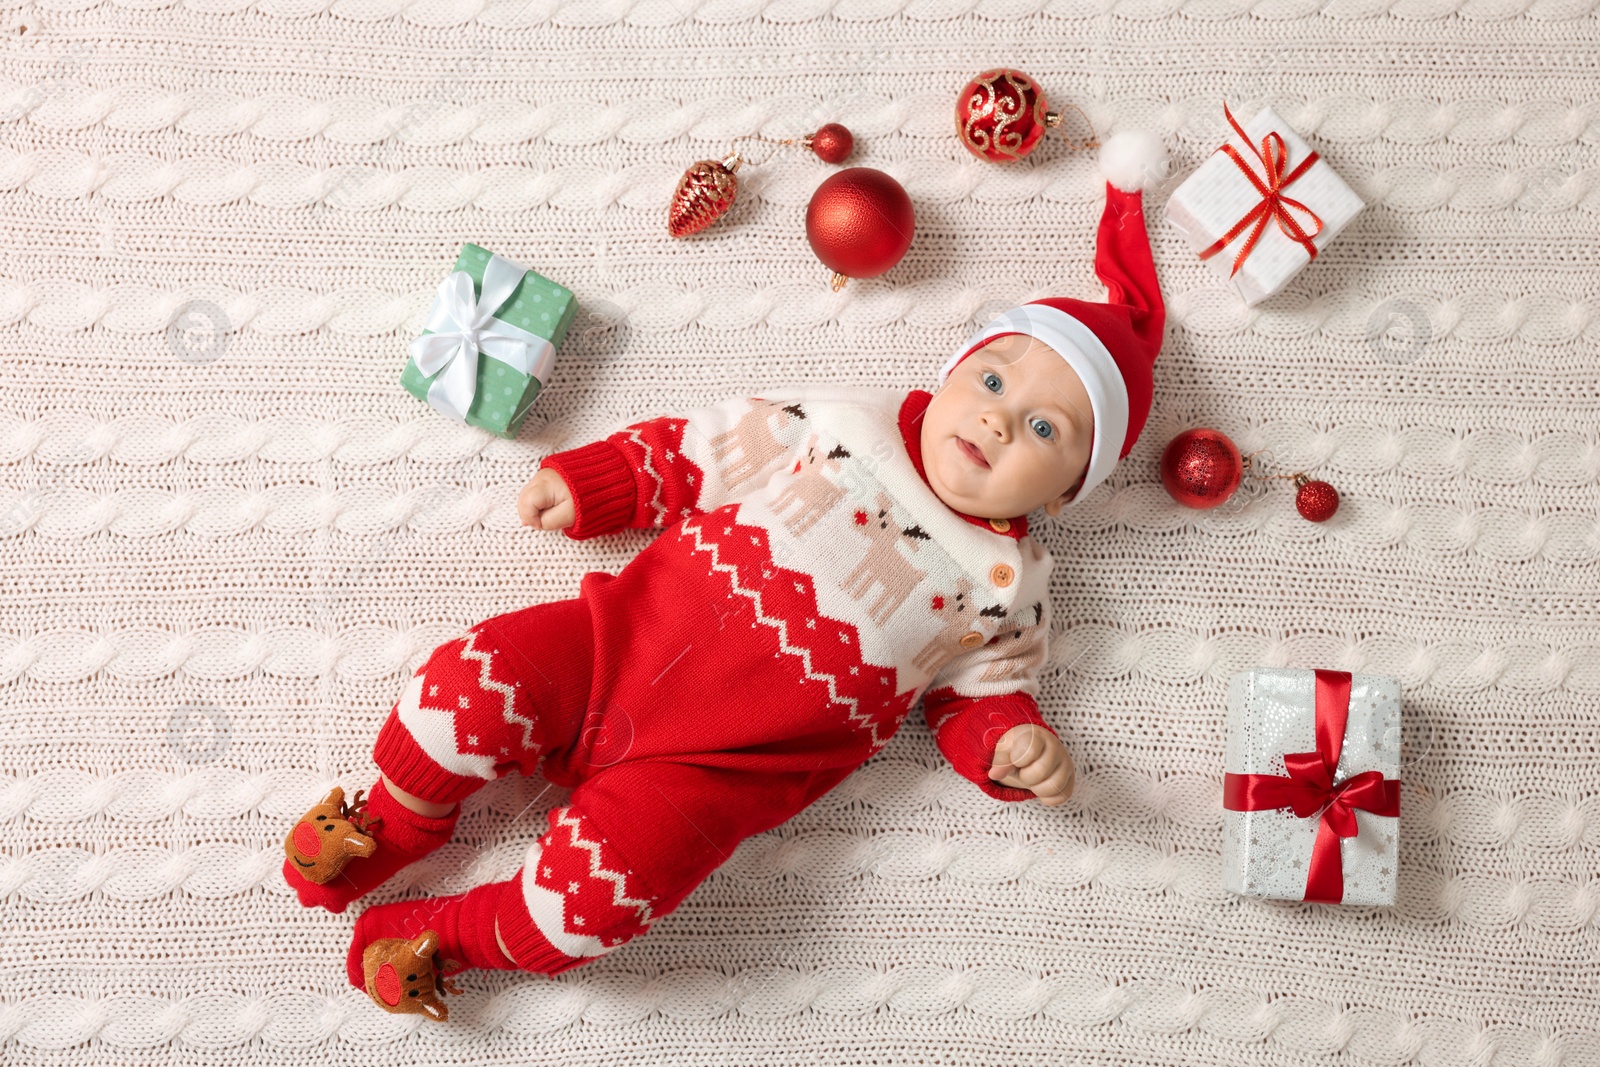 Photo of Cute little baby in Christmas outfit surrounded by festive items on white knitted plaid, top view. Winter holiday